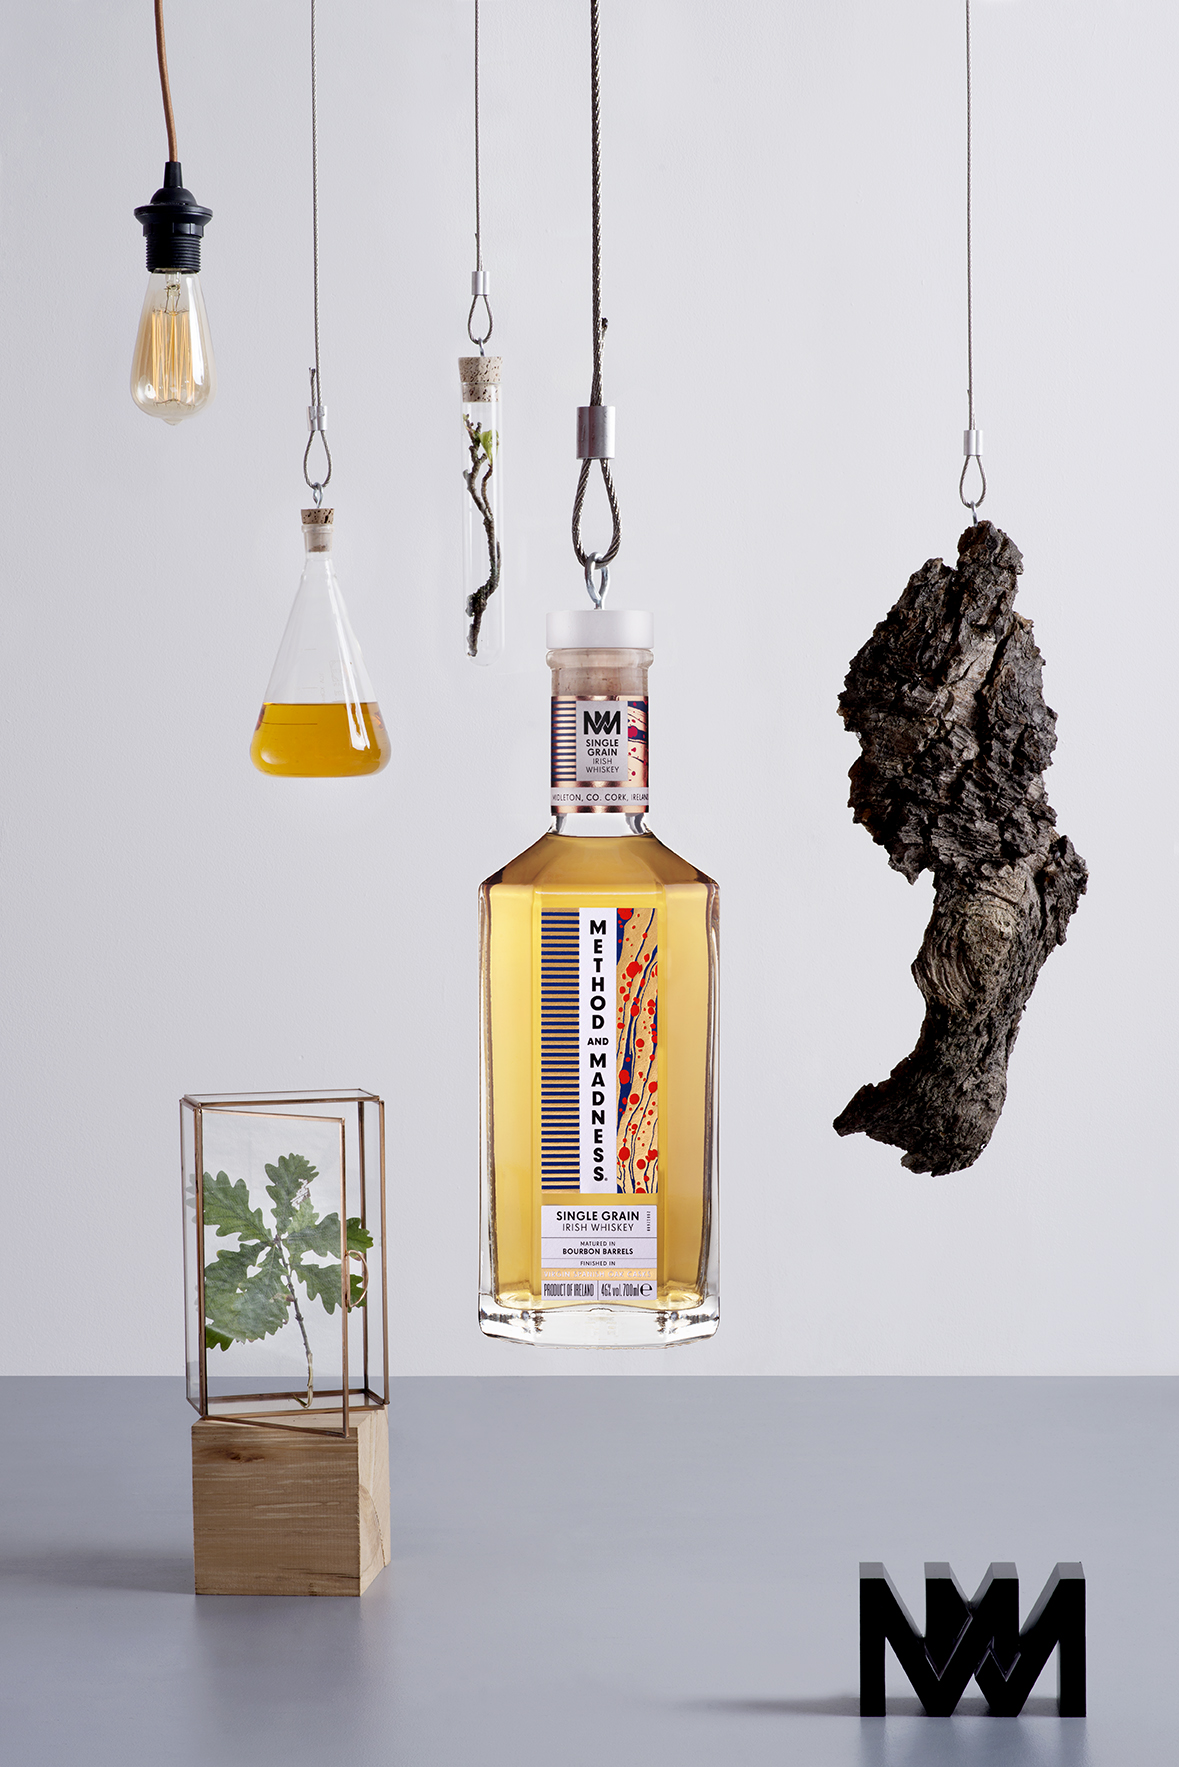 Client: Pernod Ricard: METHOD AND MADNESS